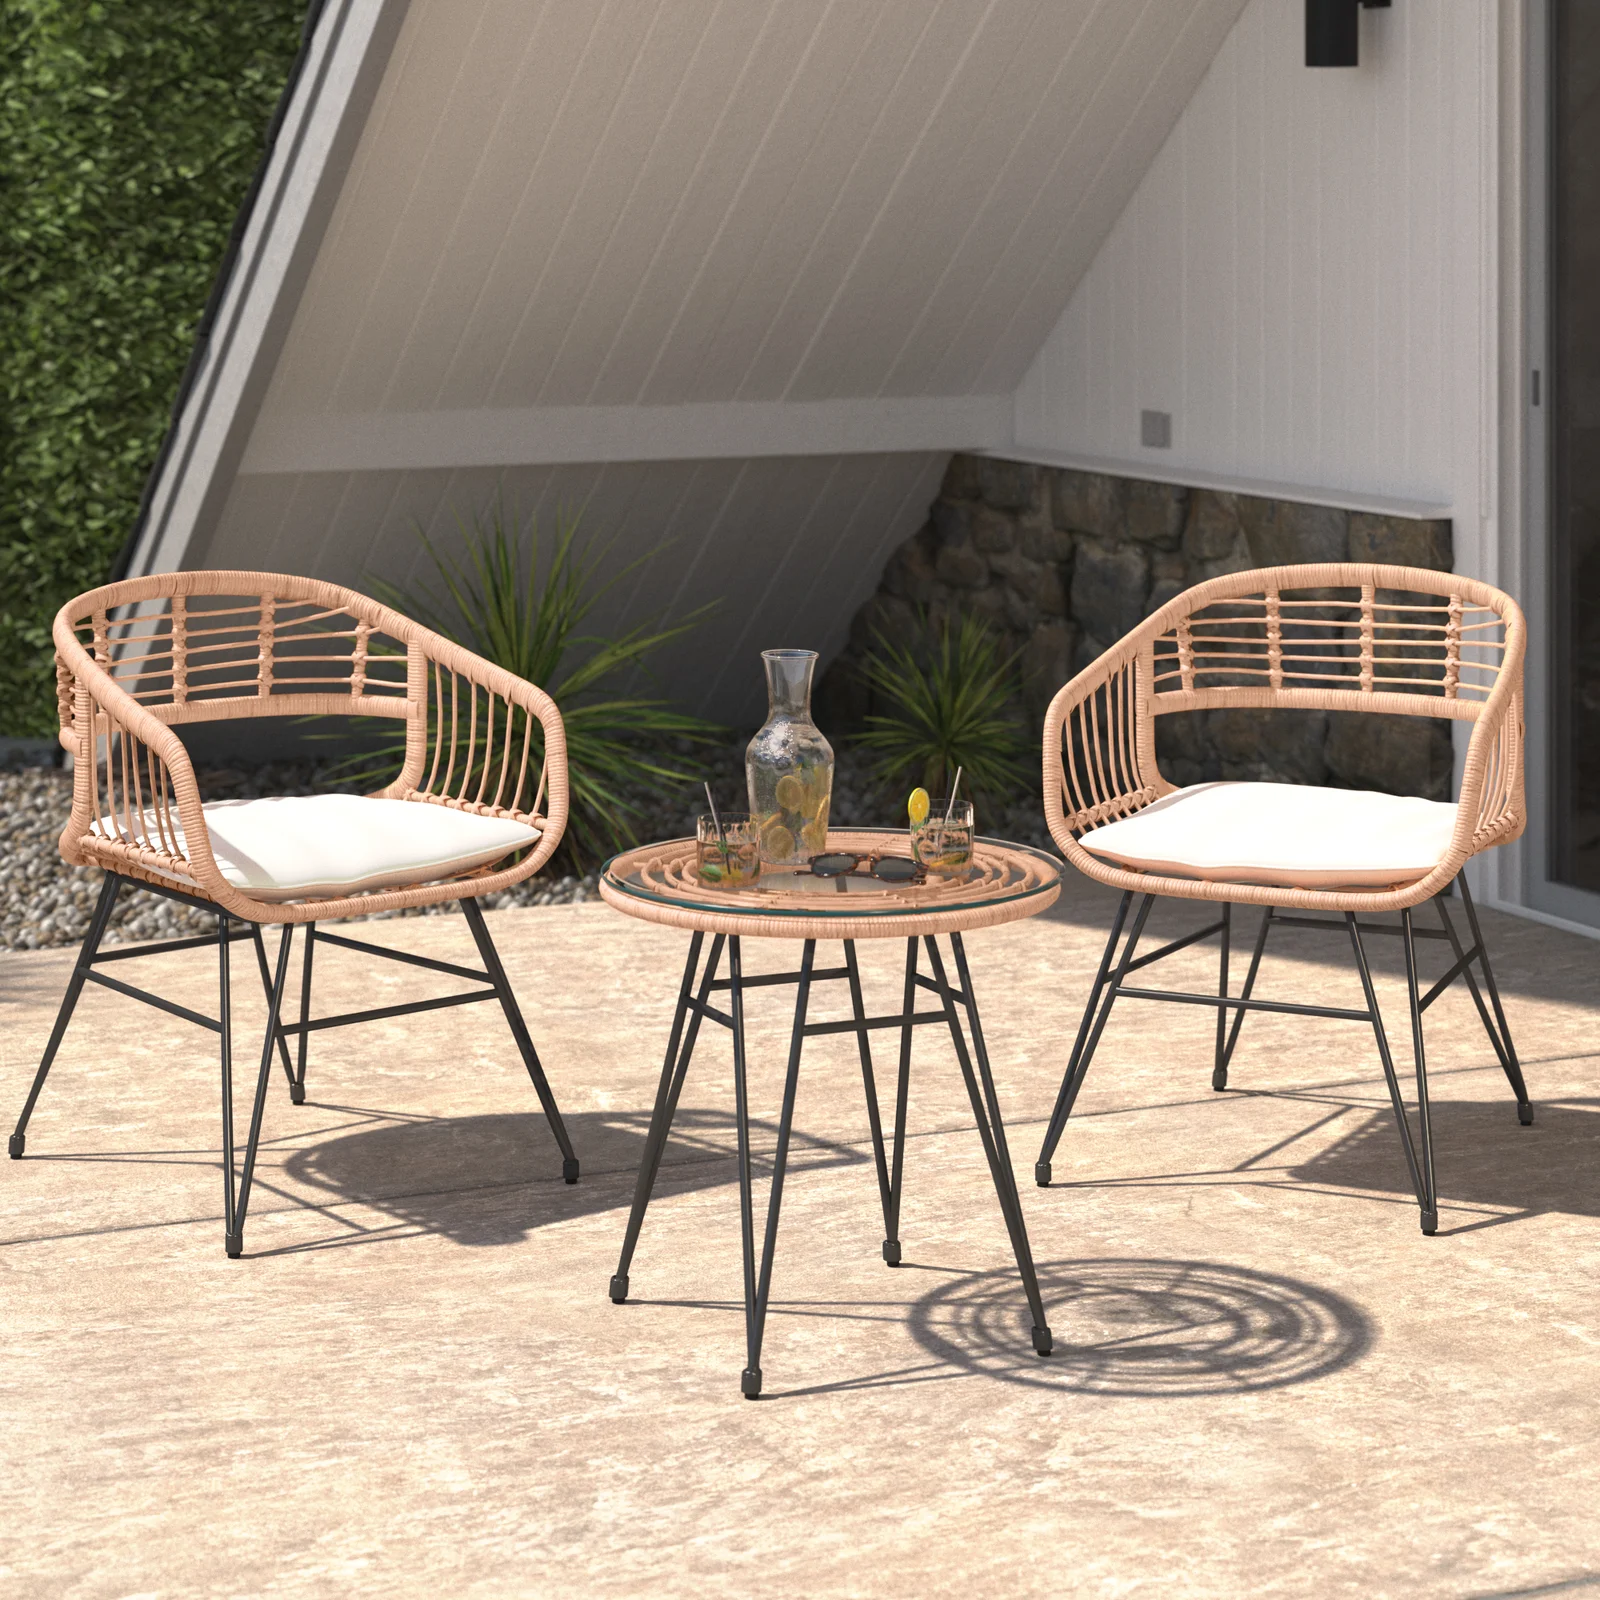 Bella Outdoor Patio Seating Set 2 Chairs and 1 Table Set (Honey)